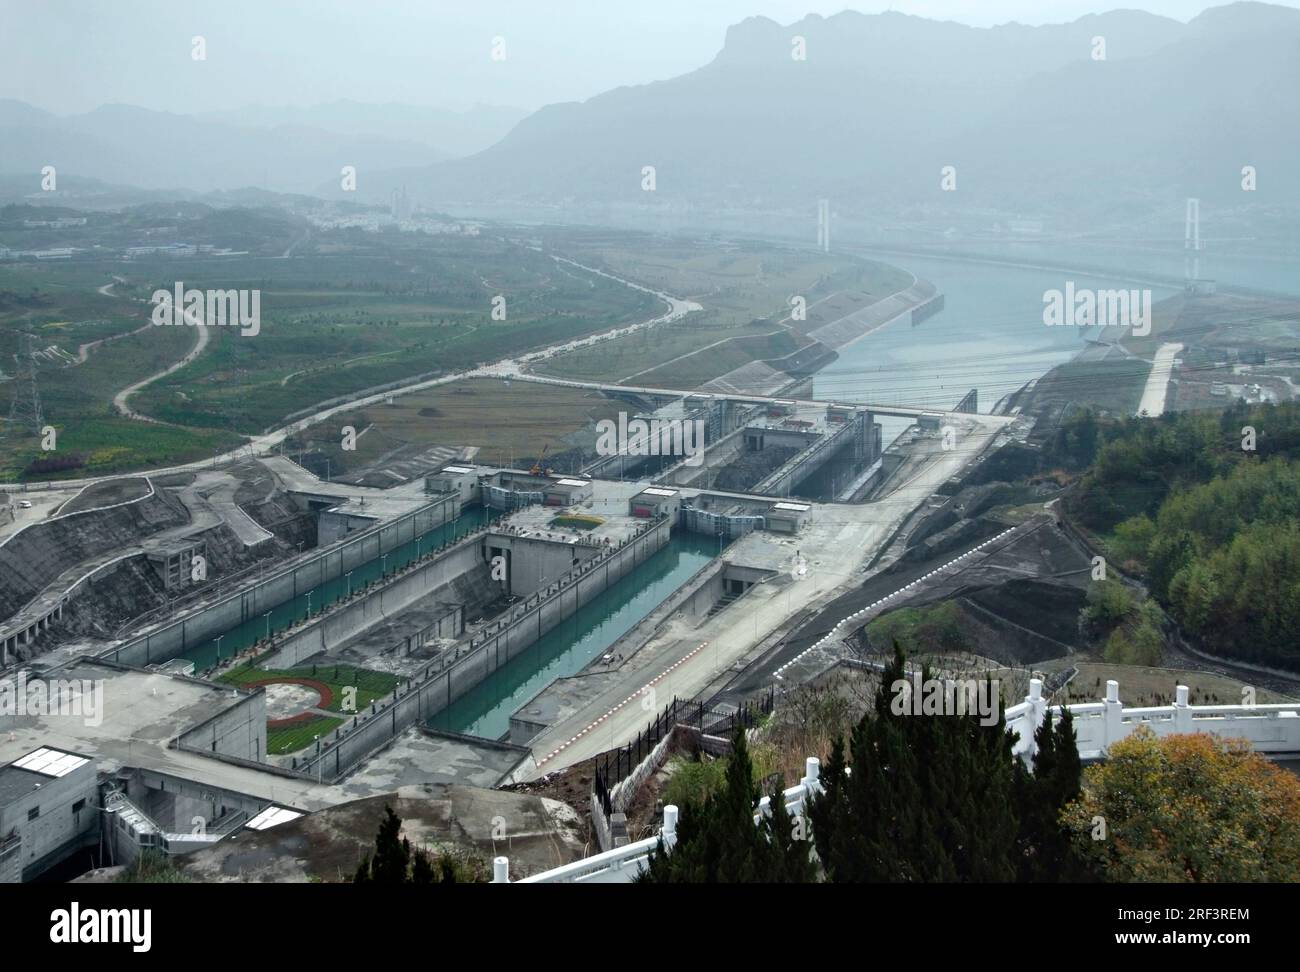 foggy aerial view of the Three Gorges Dam at Yangtze River in China Stock Photo